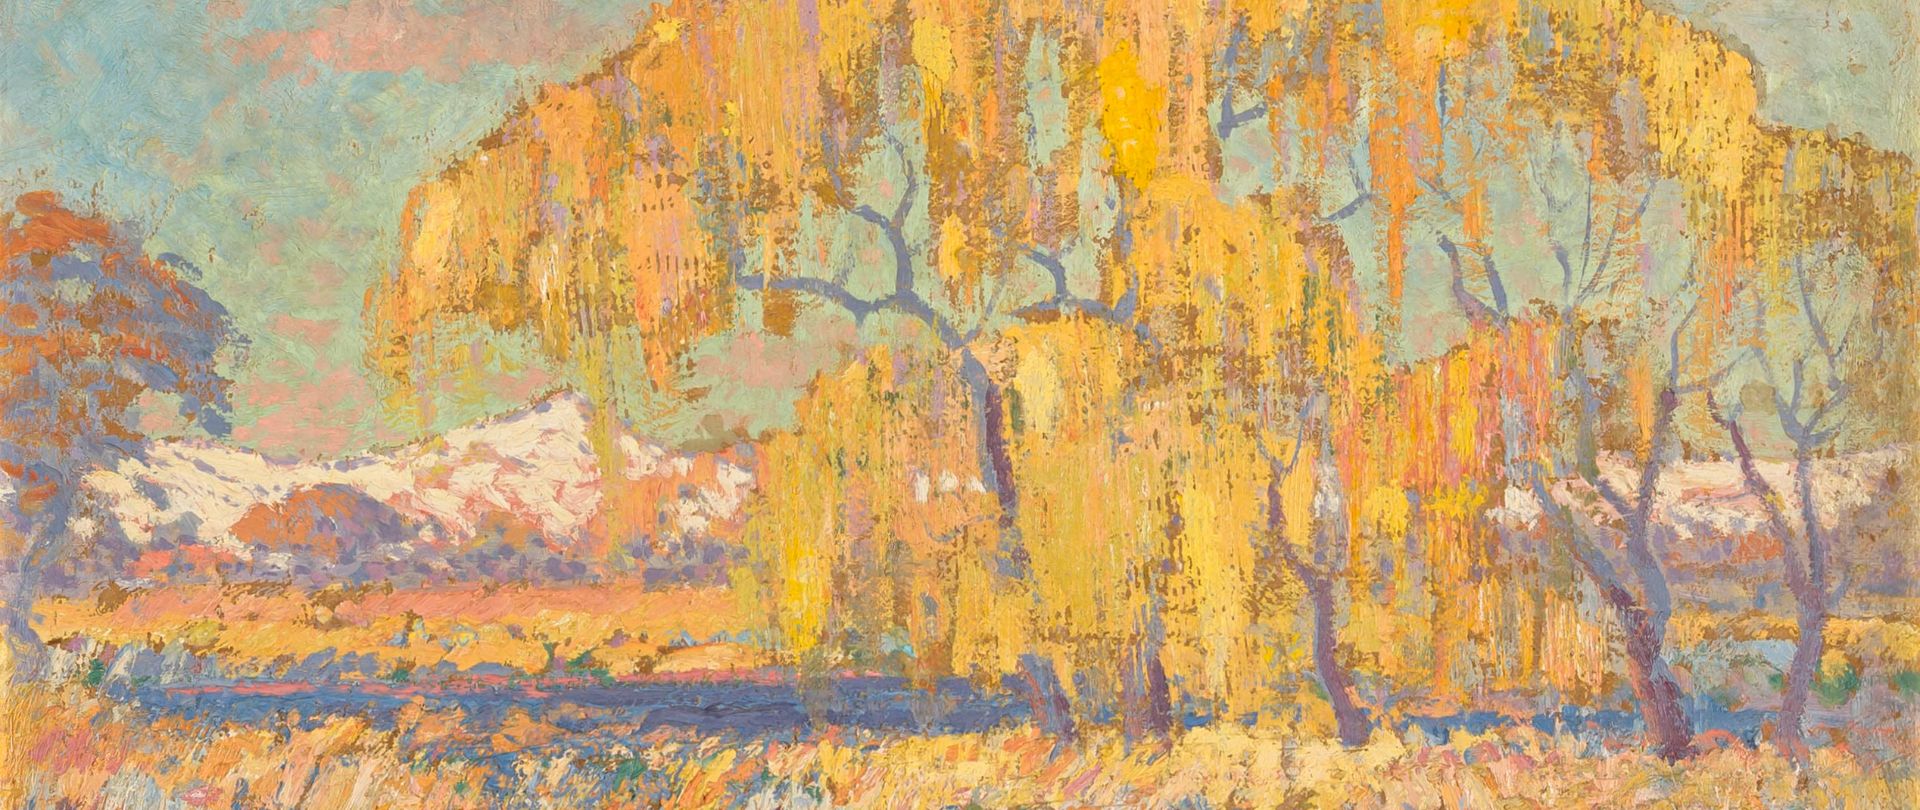 Fresh-to-market paintings by Pierneef, Preller, Sekoto and Stern to be sold during Johannesburg Auction Week